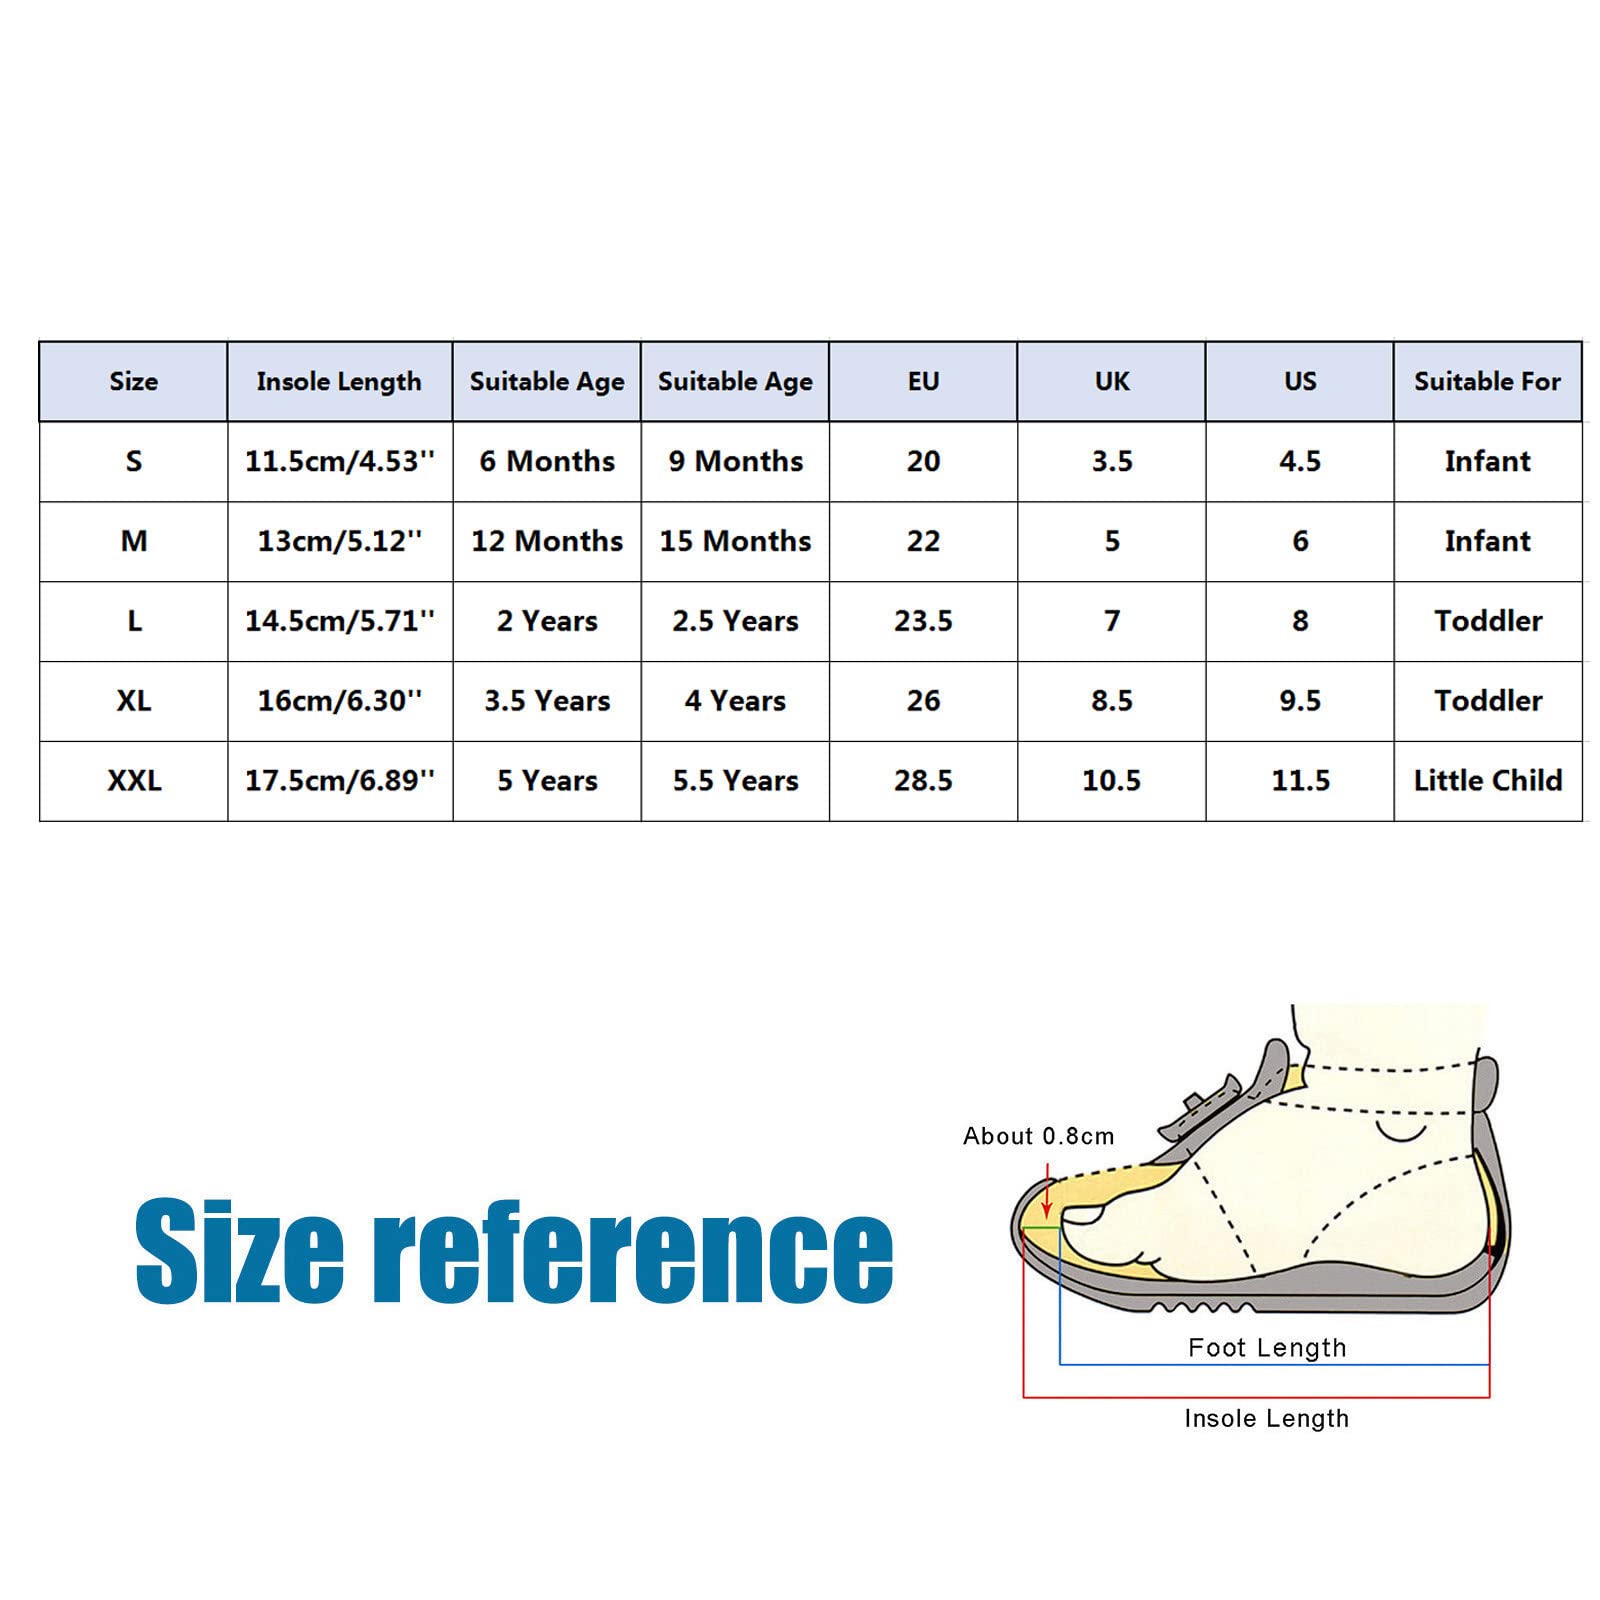 Boys Open Toe Shoes Boys and Girls Cartoon Character Pattern Warm Toddler Shoes Indoor Floor Toddler Shoes Size 8 Boys